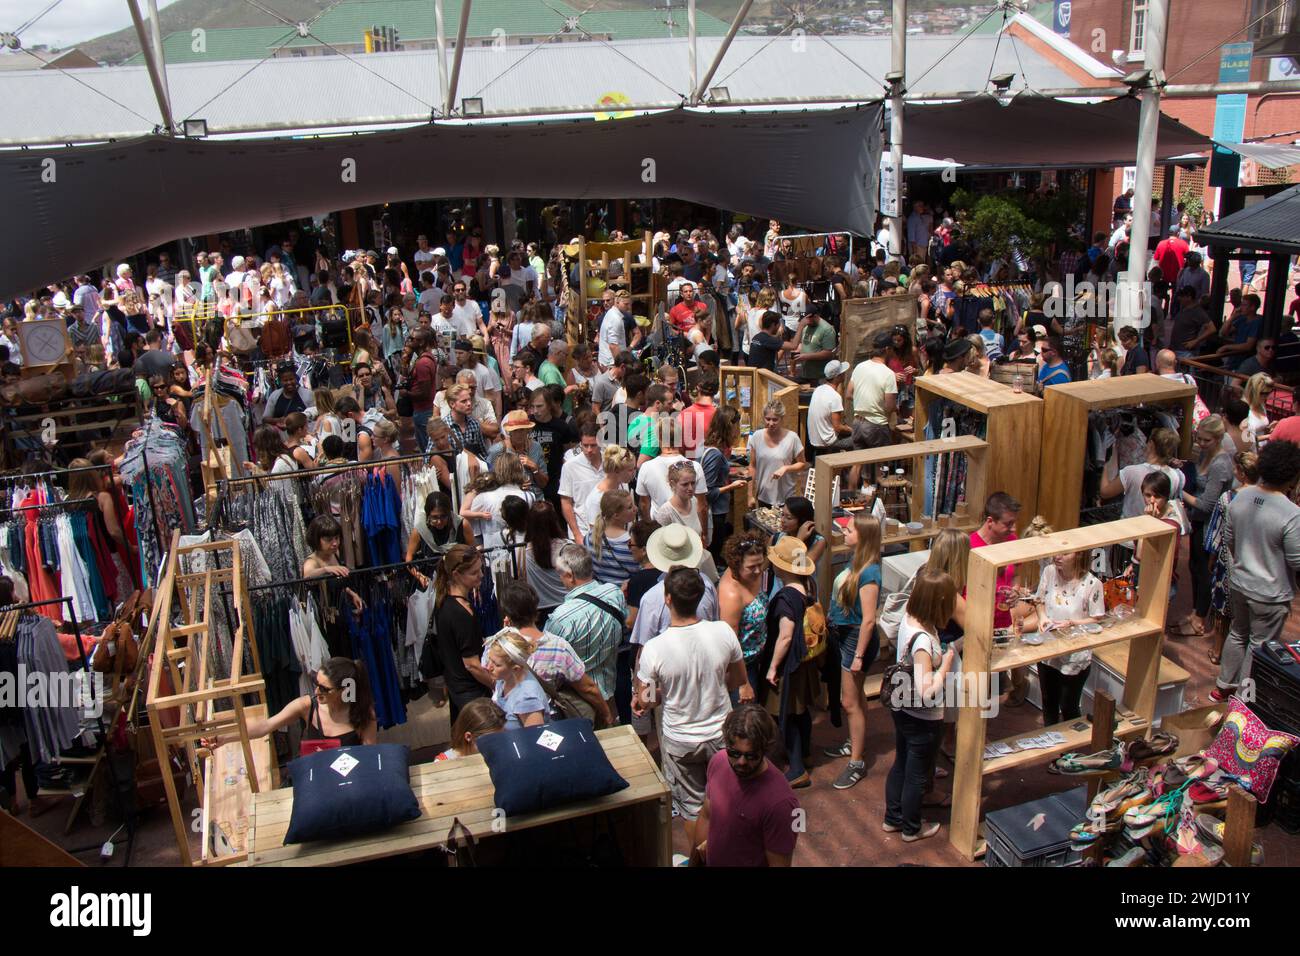 Neighbours goods market time in Capetown. Young hip people gather to enjoy live music, good food, local designer clothes and the boho vibe. Stock Photo